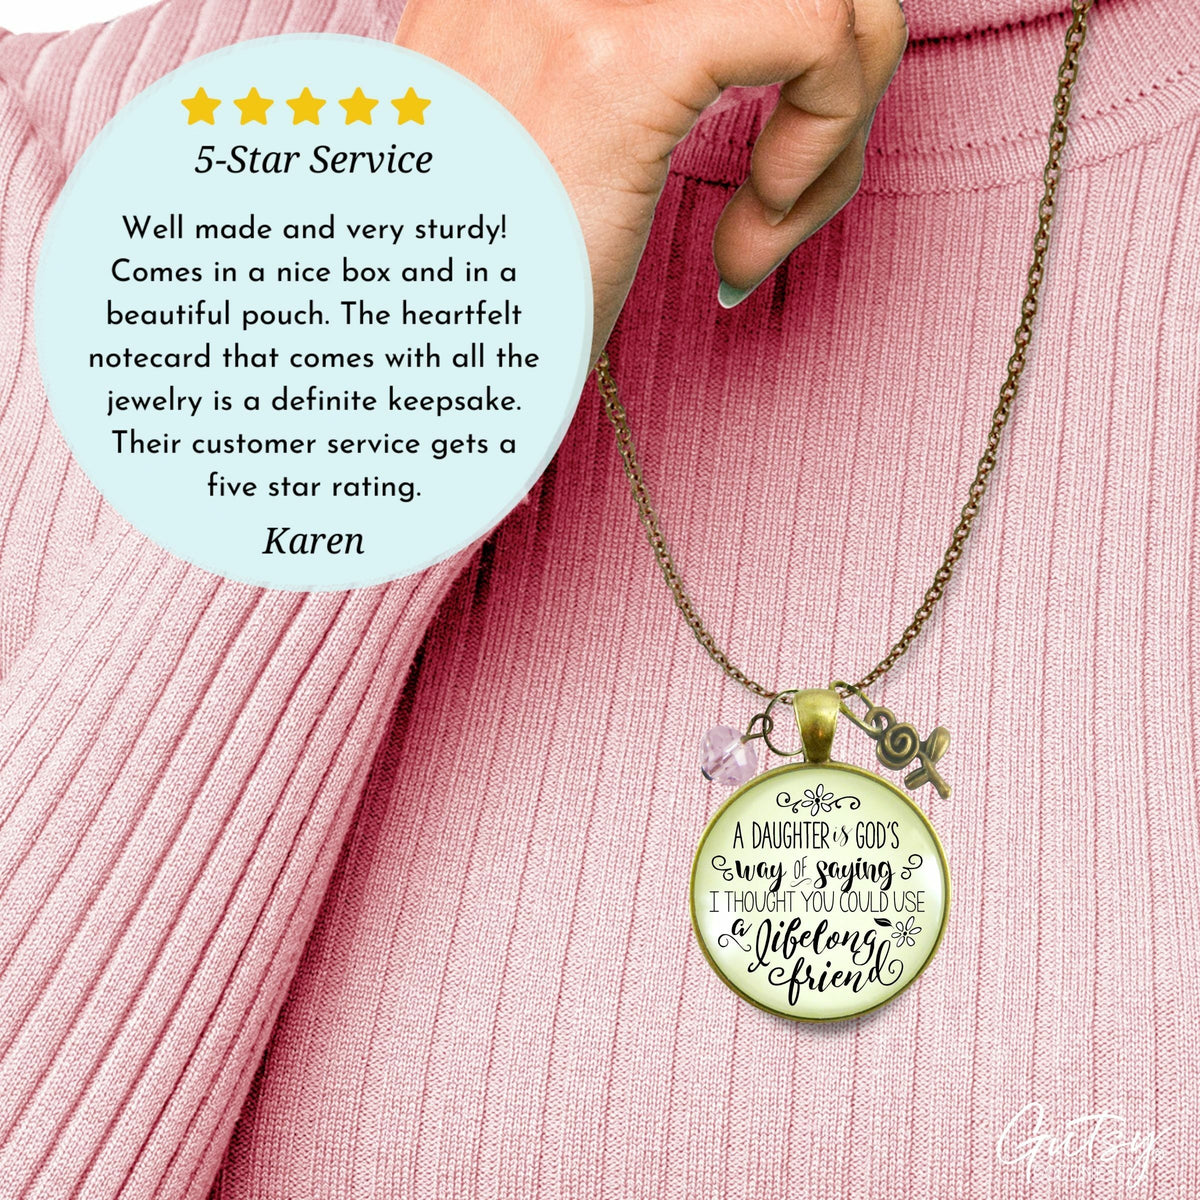 Gutsy Goodness Mother Necklace Daughter is God's Way Lifelong Friend Faith Jewelry - Gutsy Goodness Handmade Jewelry;Mother Necklace Daughter Is God's Way Lifelong Friend Faith Jewelry - Gutsy Goodness Handmade Jewelry Gifts